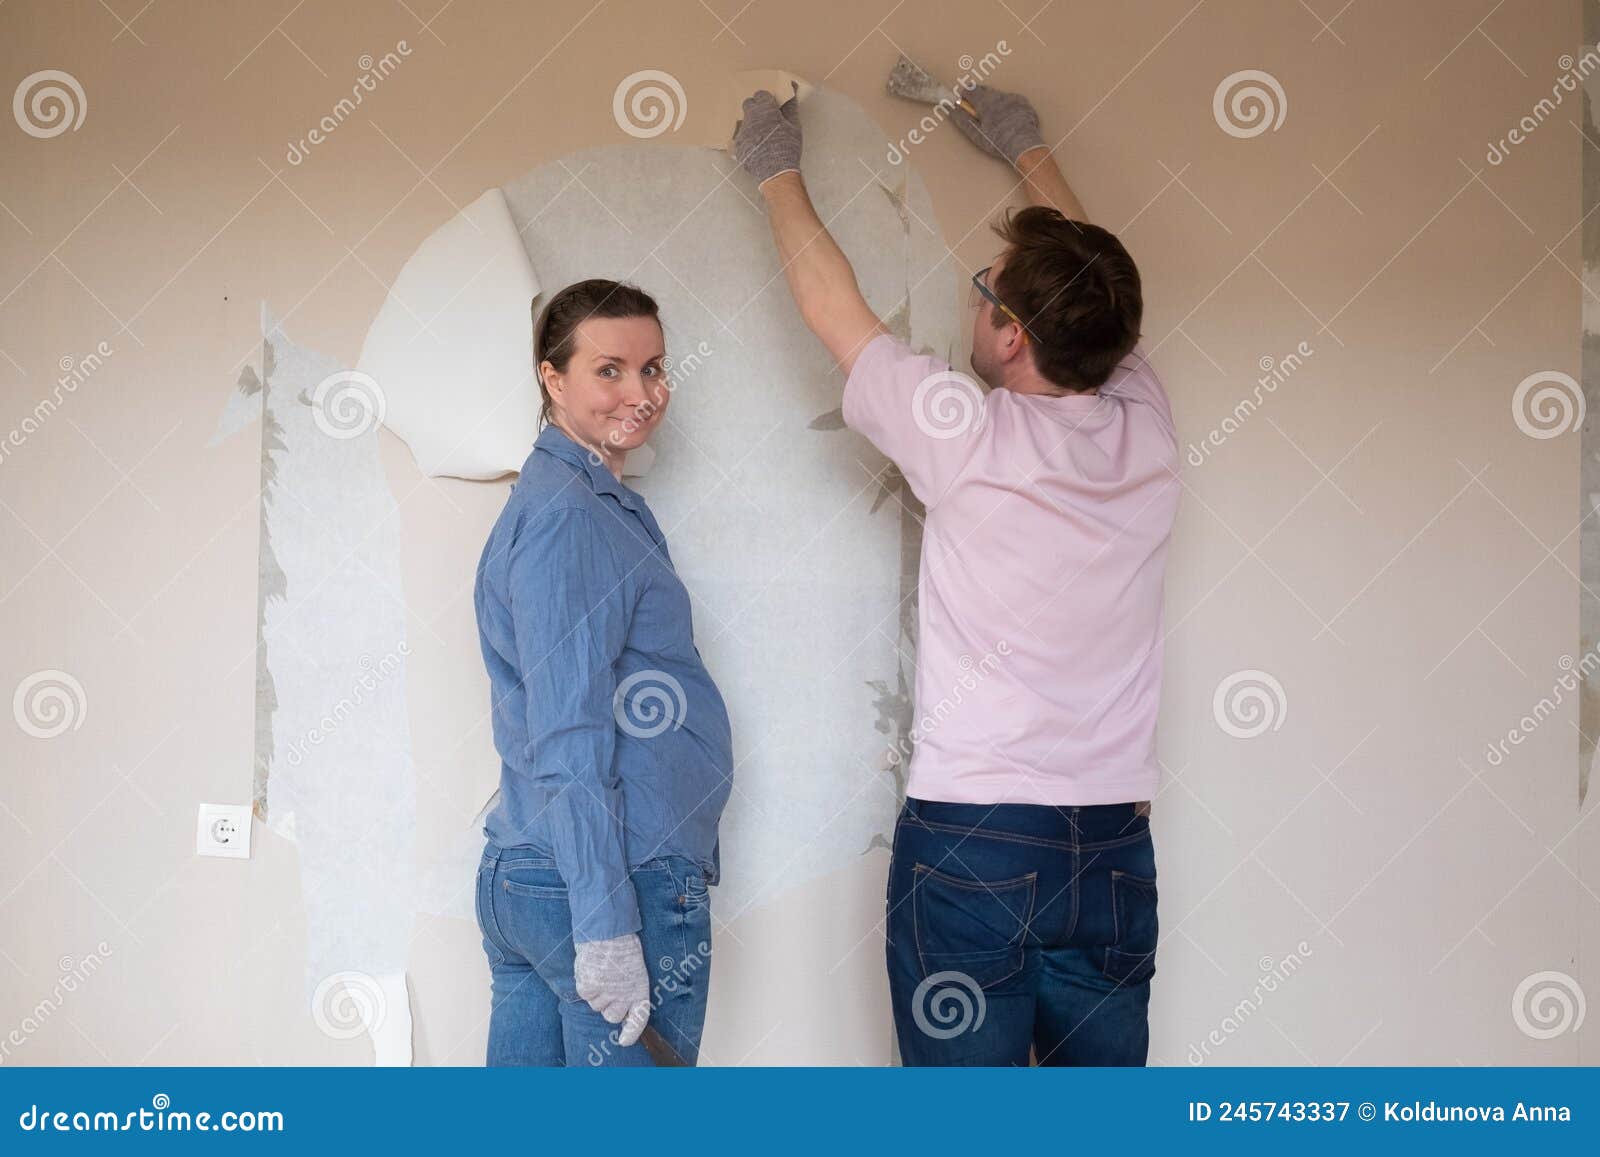 Renovation Of Room Preparation Of Walls Cleaning Wall From Wet Old  Wallpaper With Metal Spatula Stock Photo Picture And Royalty Free Image  Image 64521477